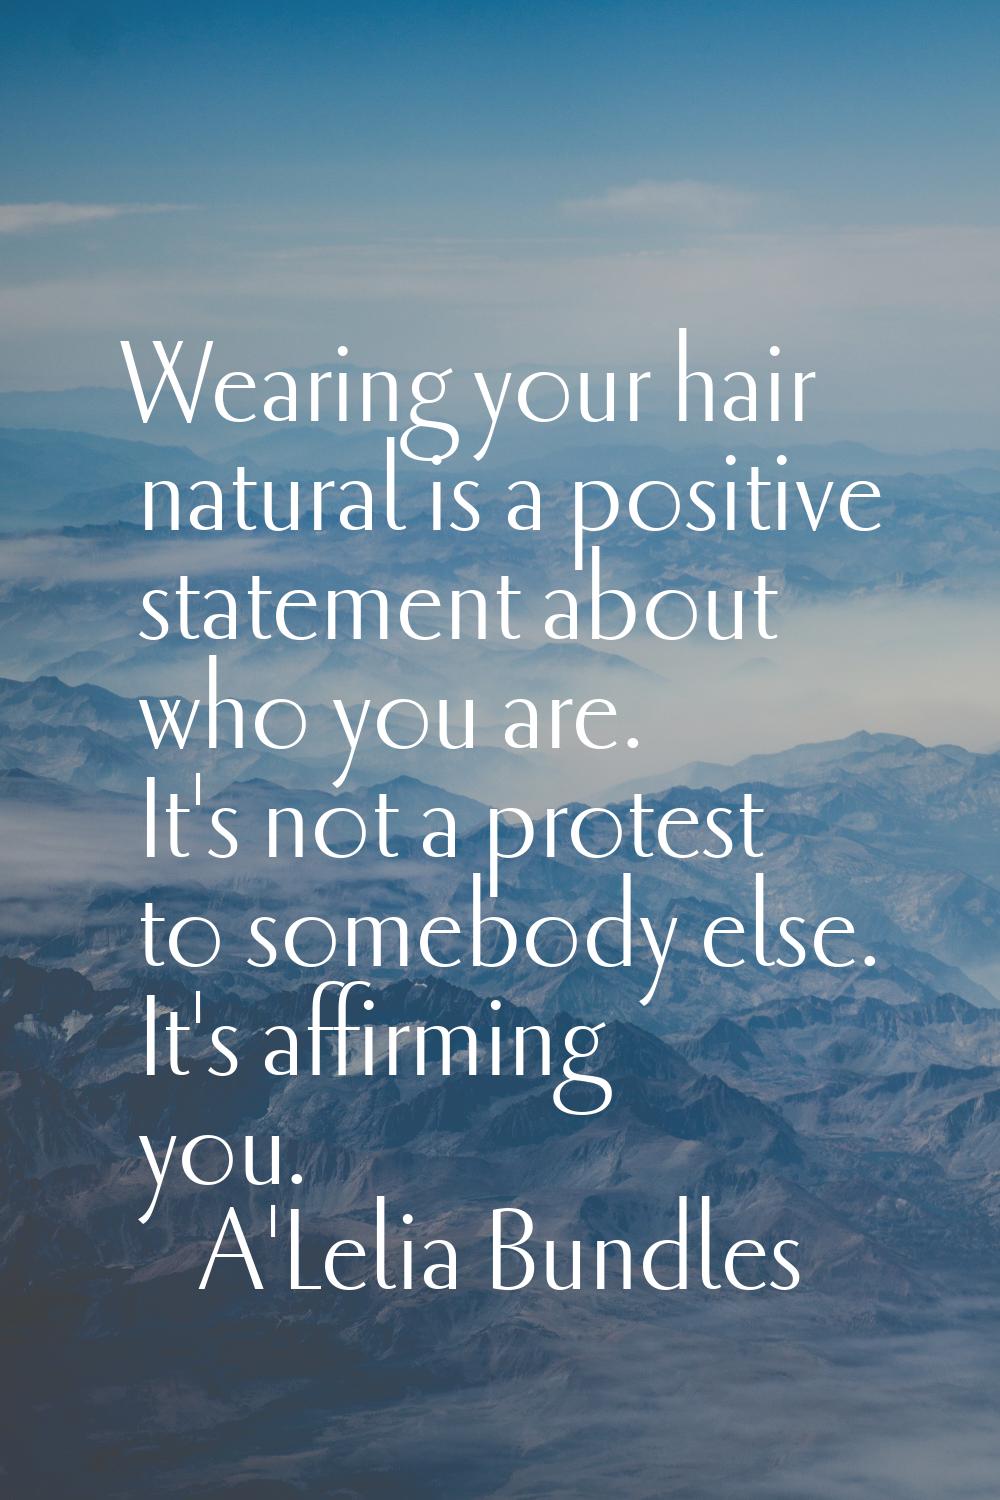 Wearing your hair natural is a positive statement about who you are. It's not a protest to somebody